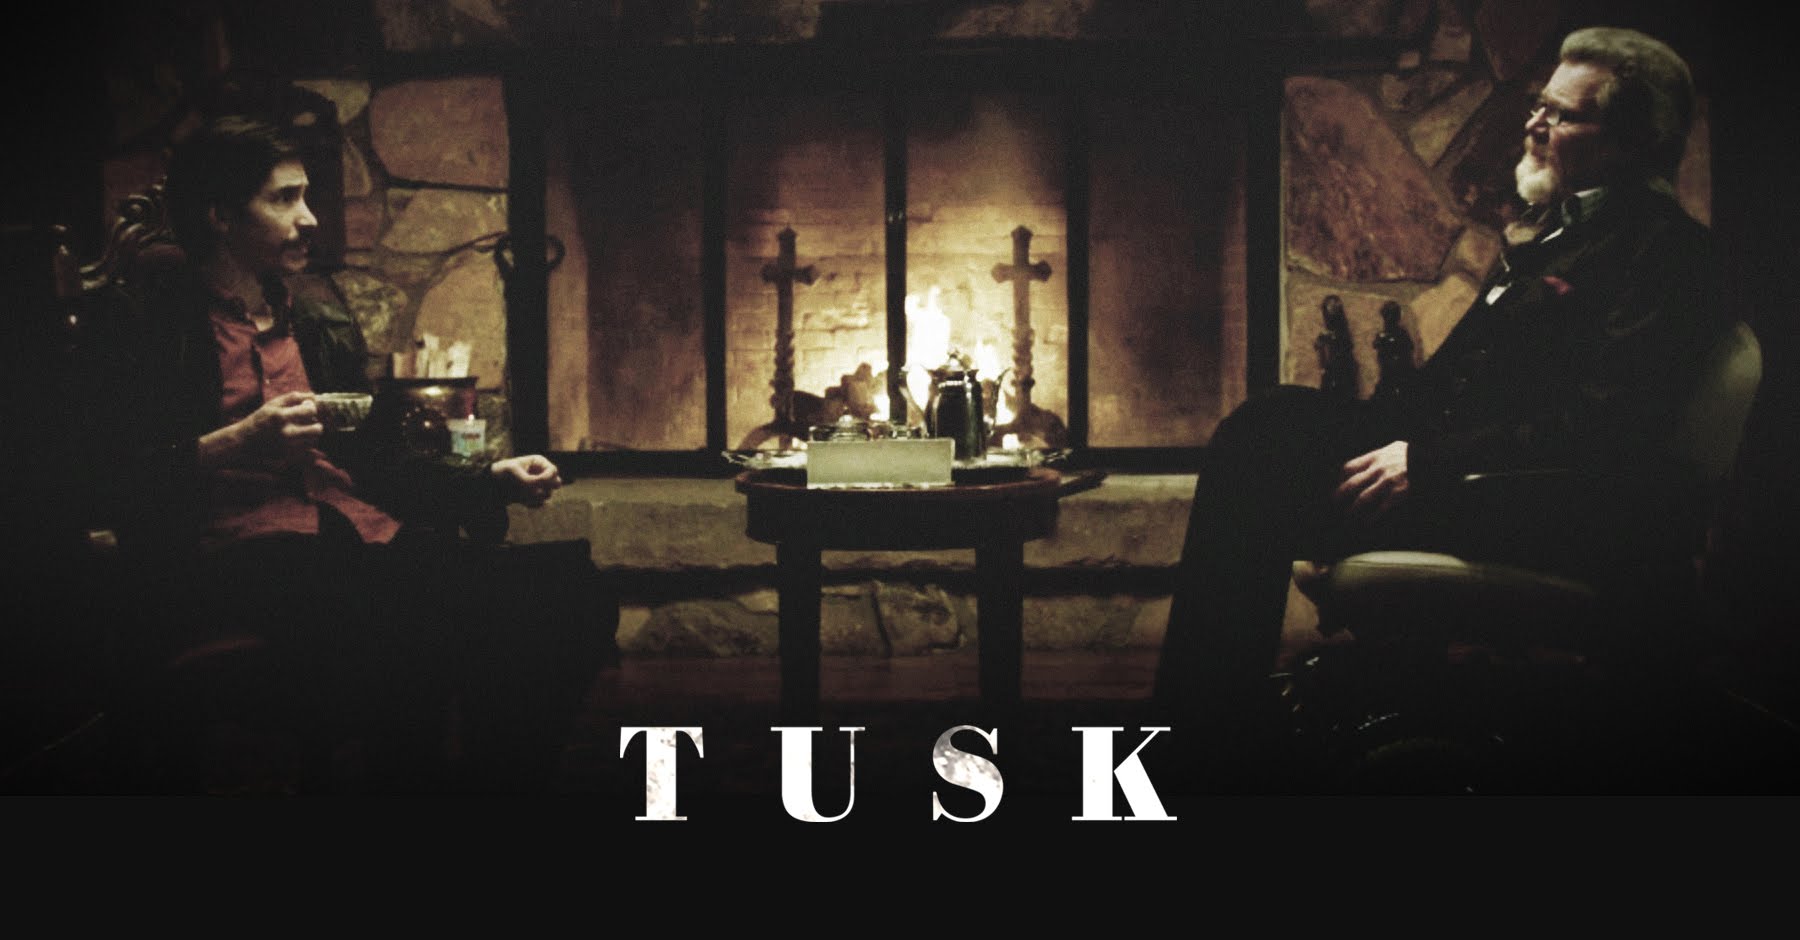 Tusk. A wired little movie by Kevin Smith